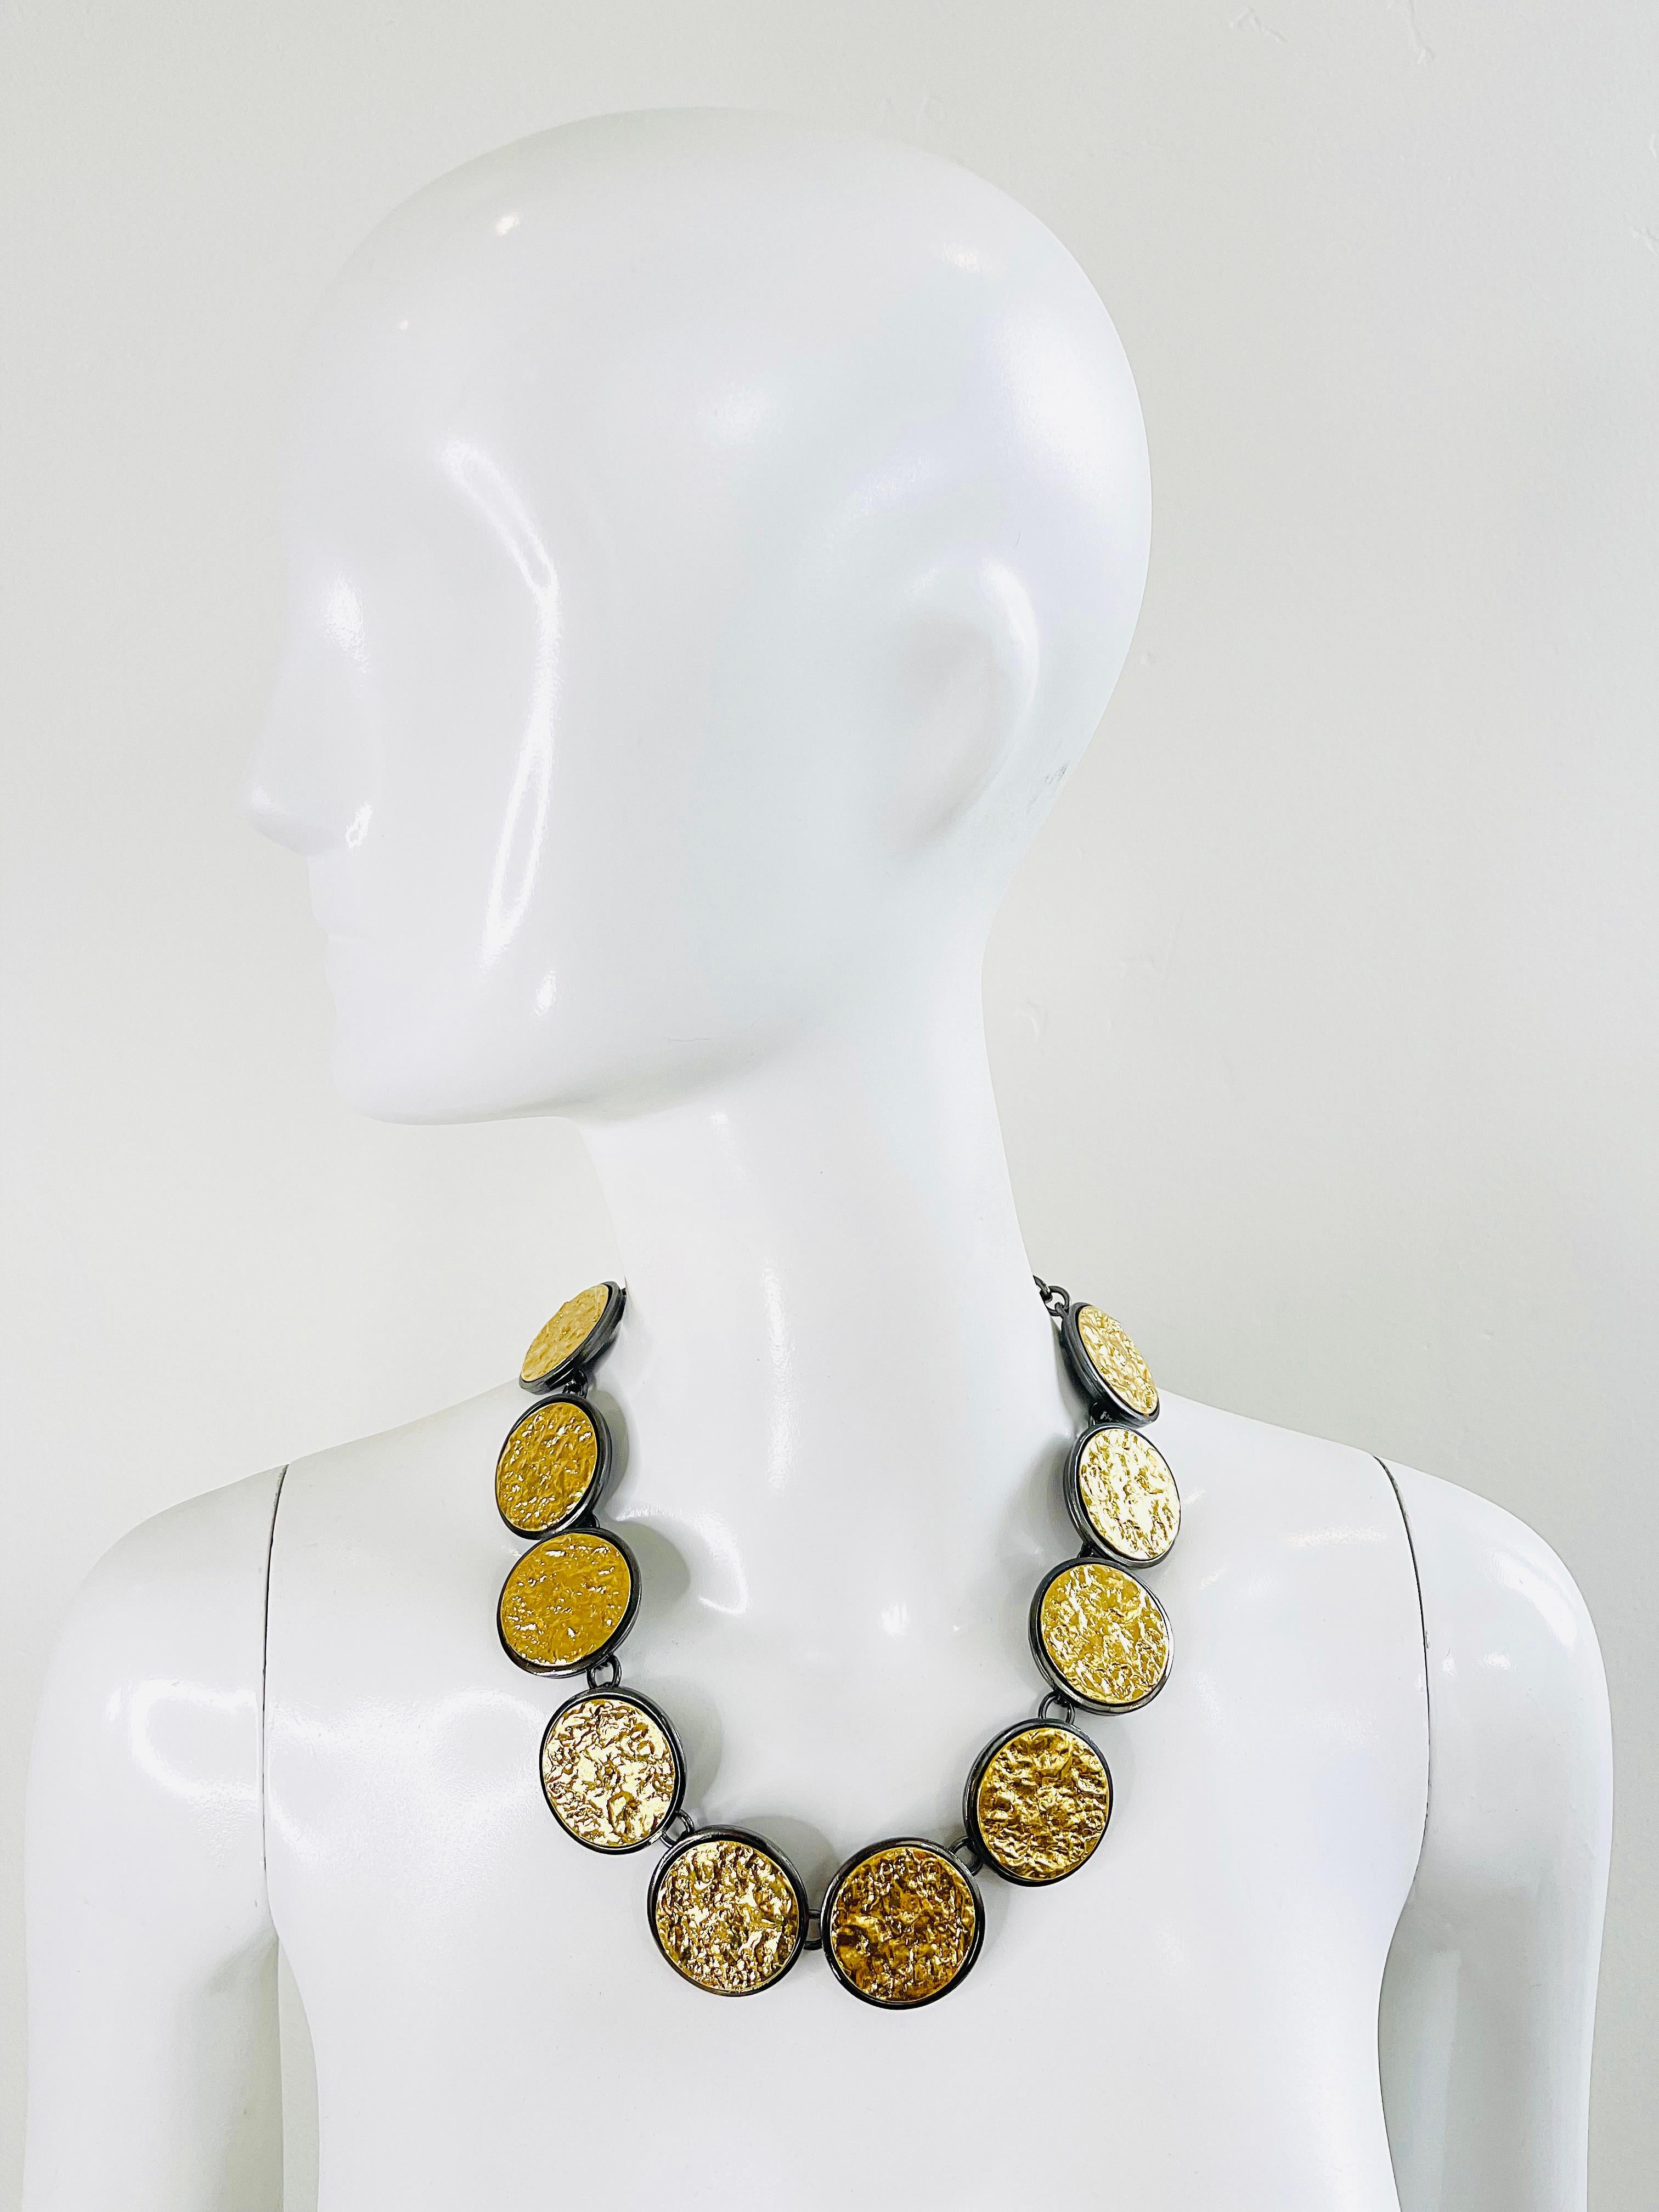 Amazing limited edition YVES SAINT LAURENT by ROBERT GOOSSENS vermeil gold and gunmetal disc necklace ! This particular piece is numbered 46 of 500 ( meaning it is number 46 of the 500 that were produced ). Adjustable chain makes this super